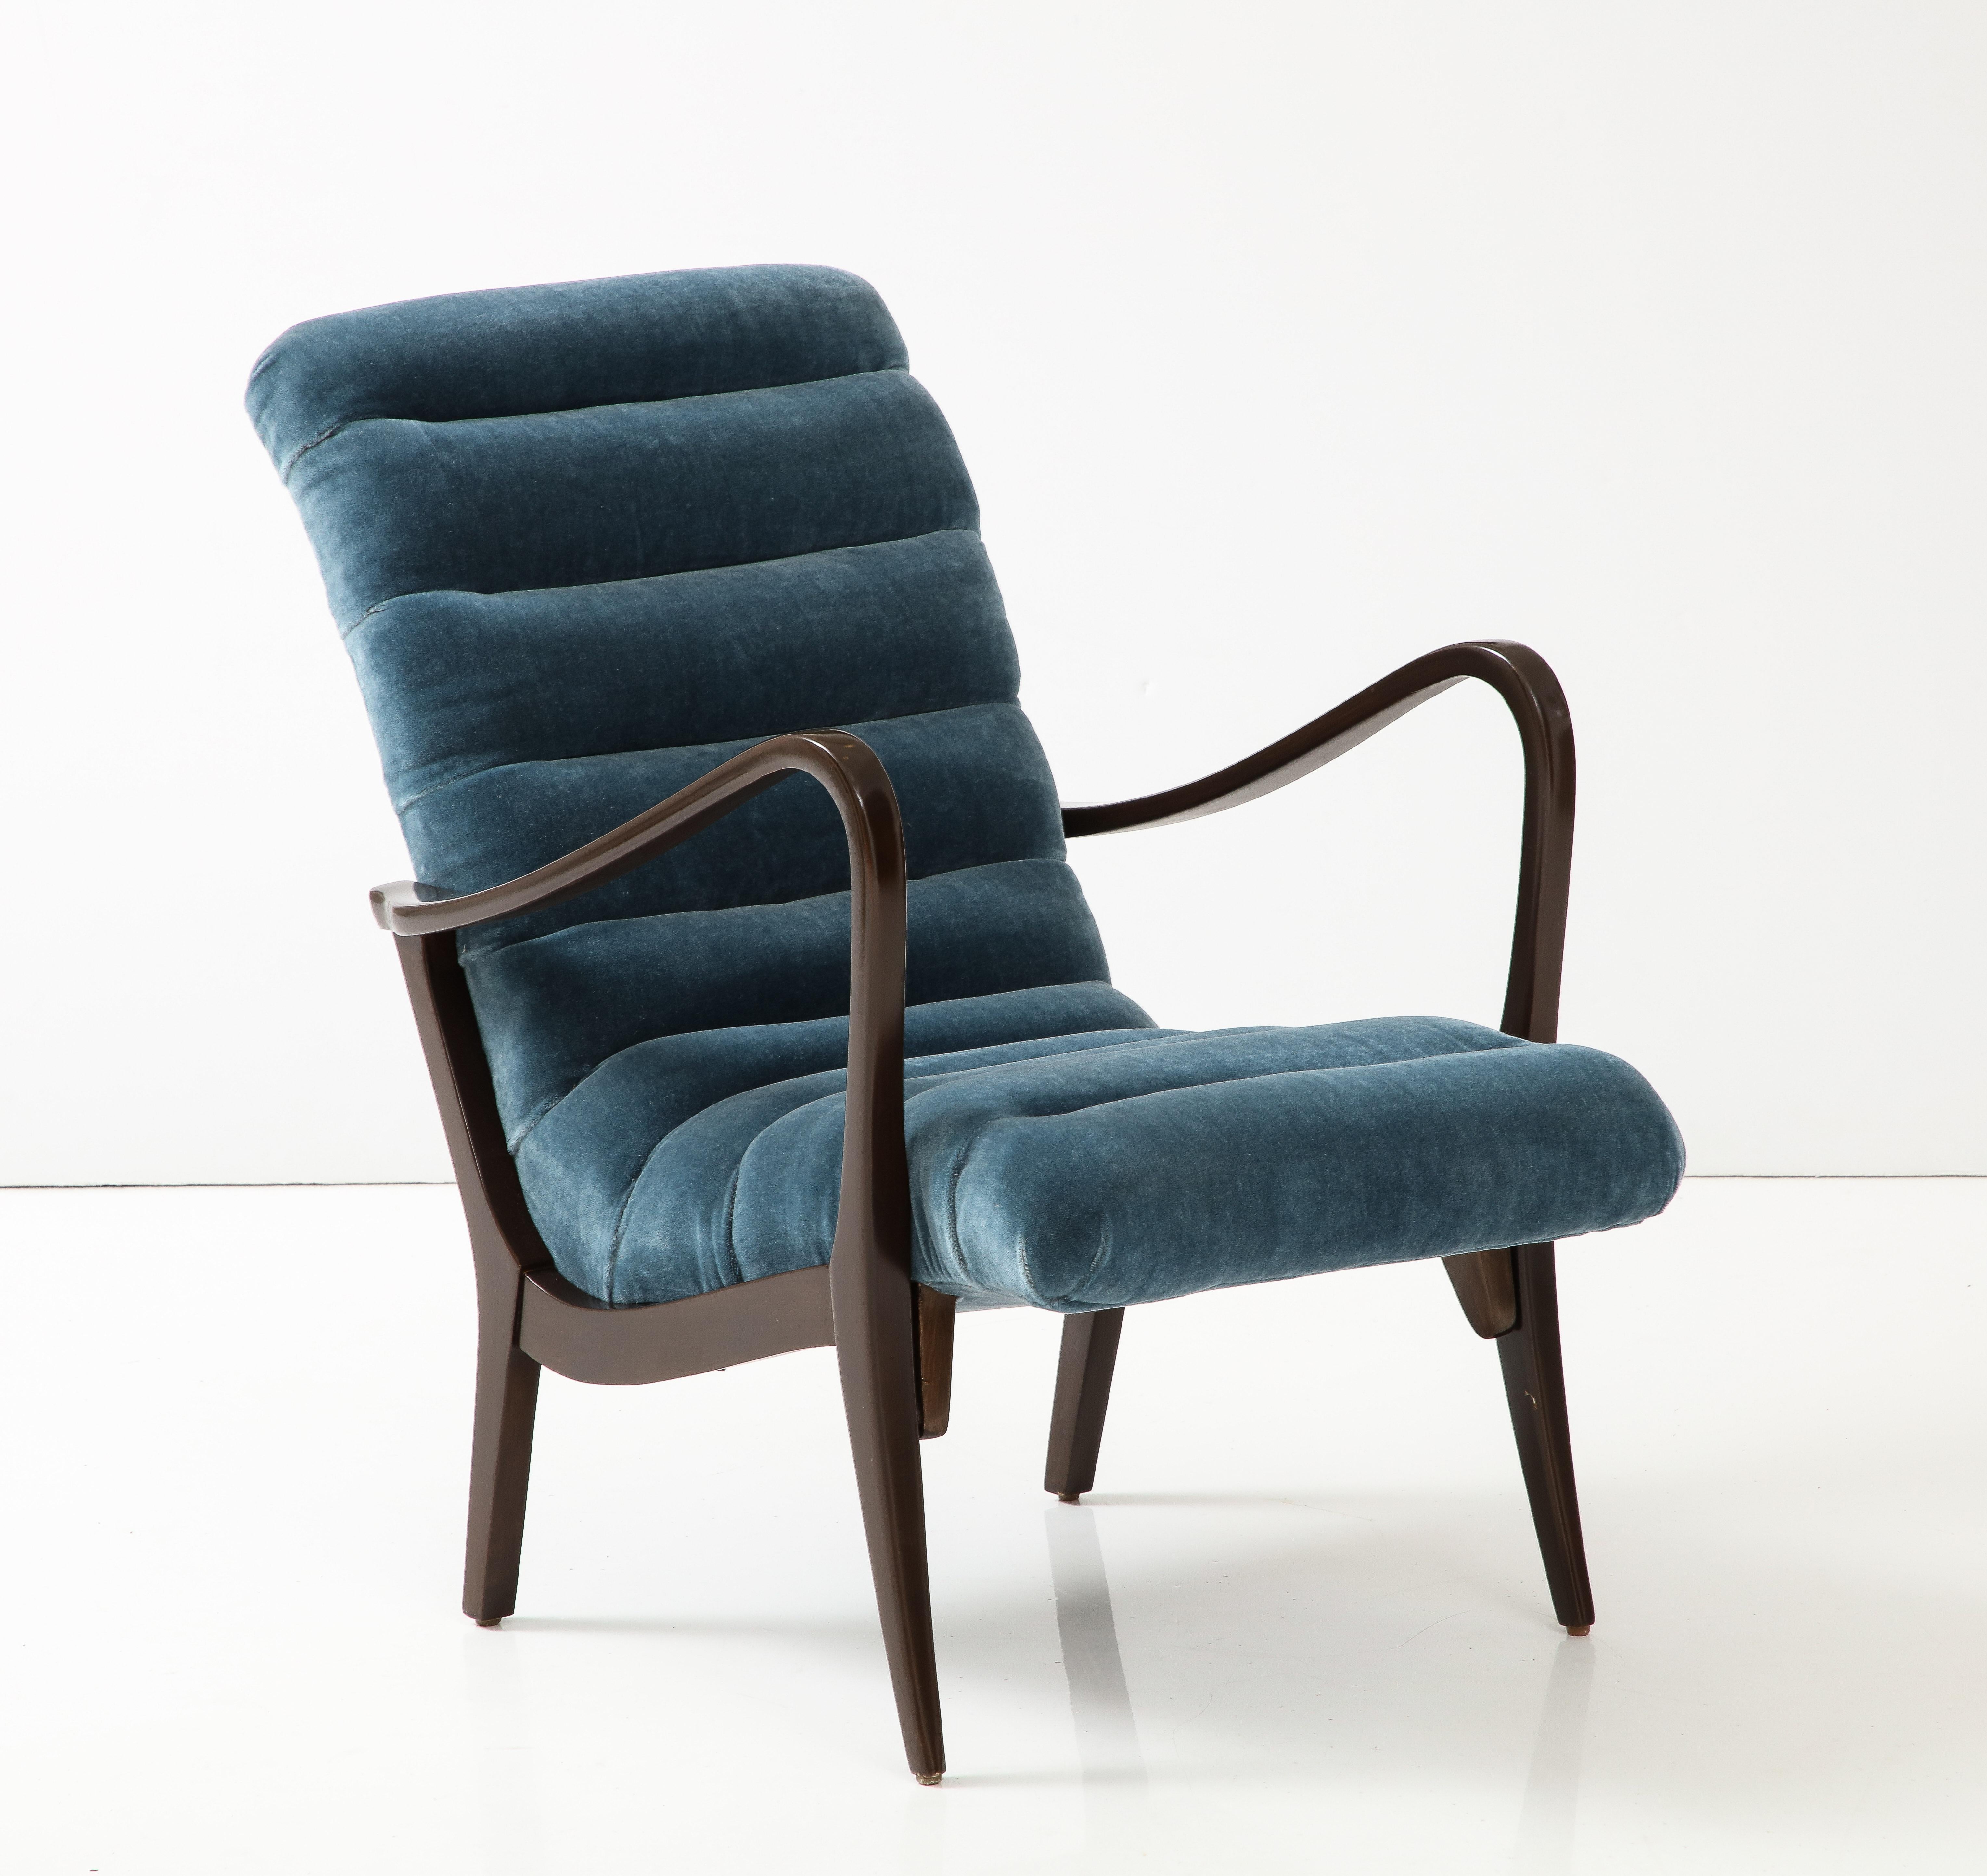 Italian Mid Century Modern lounge chair featuring sinuous arms and body hugging curved frame. Frame has been restored in a dark brown stain and upholstery has been updated in a Petrol Blue Mohair. 